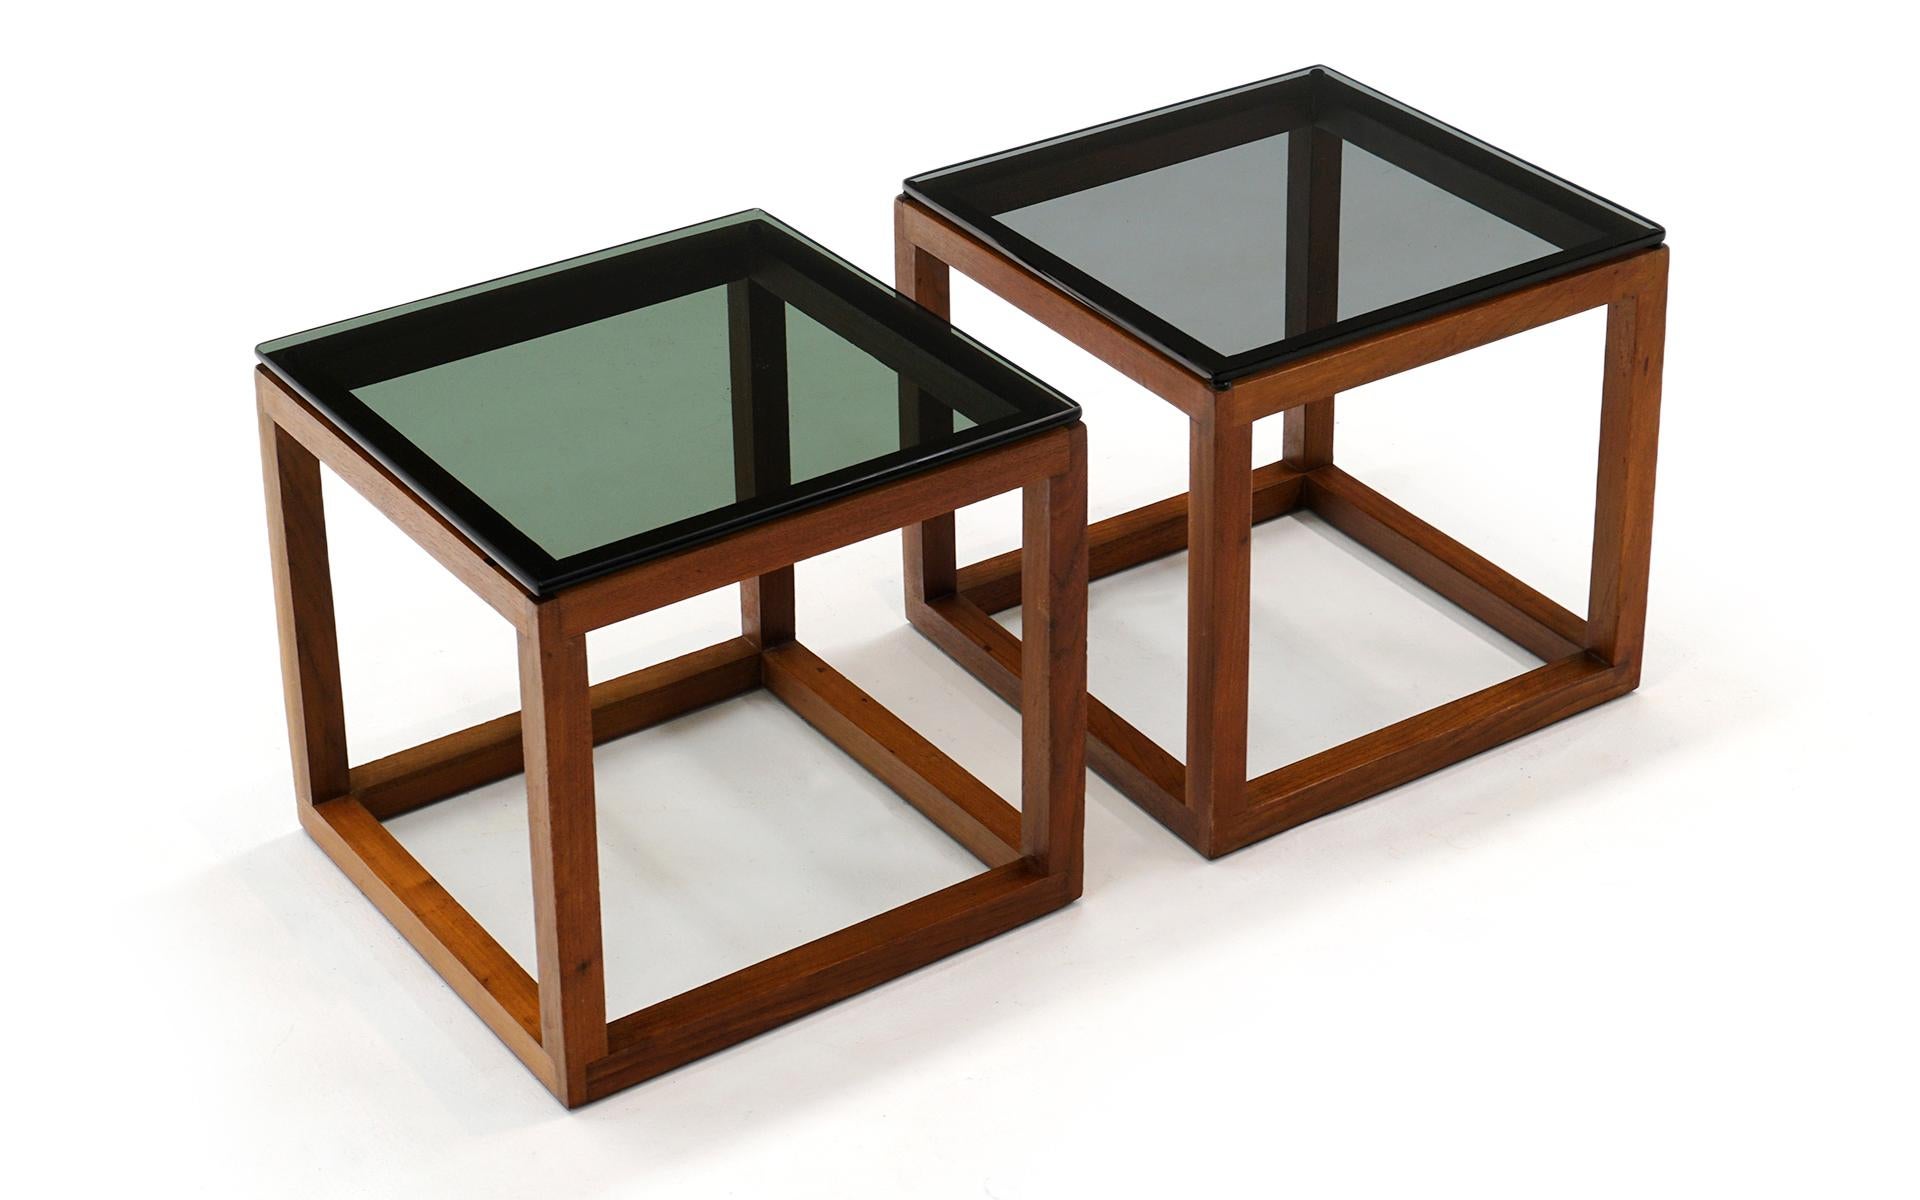 Pair of teak and grey glass end / side tables. The frames are solid teak with dovetailed joints. The glass is 3/8ths inches thick with rounded edges. Under a lot of light it is evident that one glass top is slightly darker than the other. This is